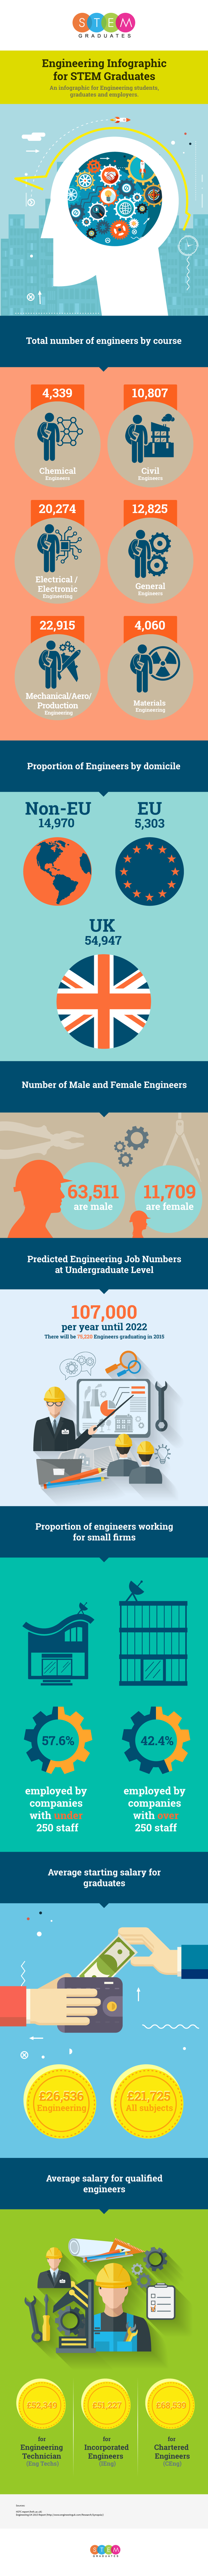 Stem infographic for engineers